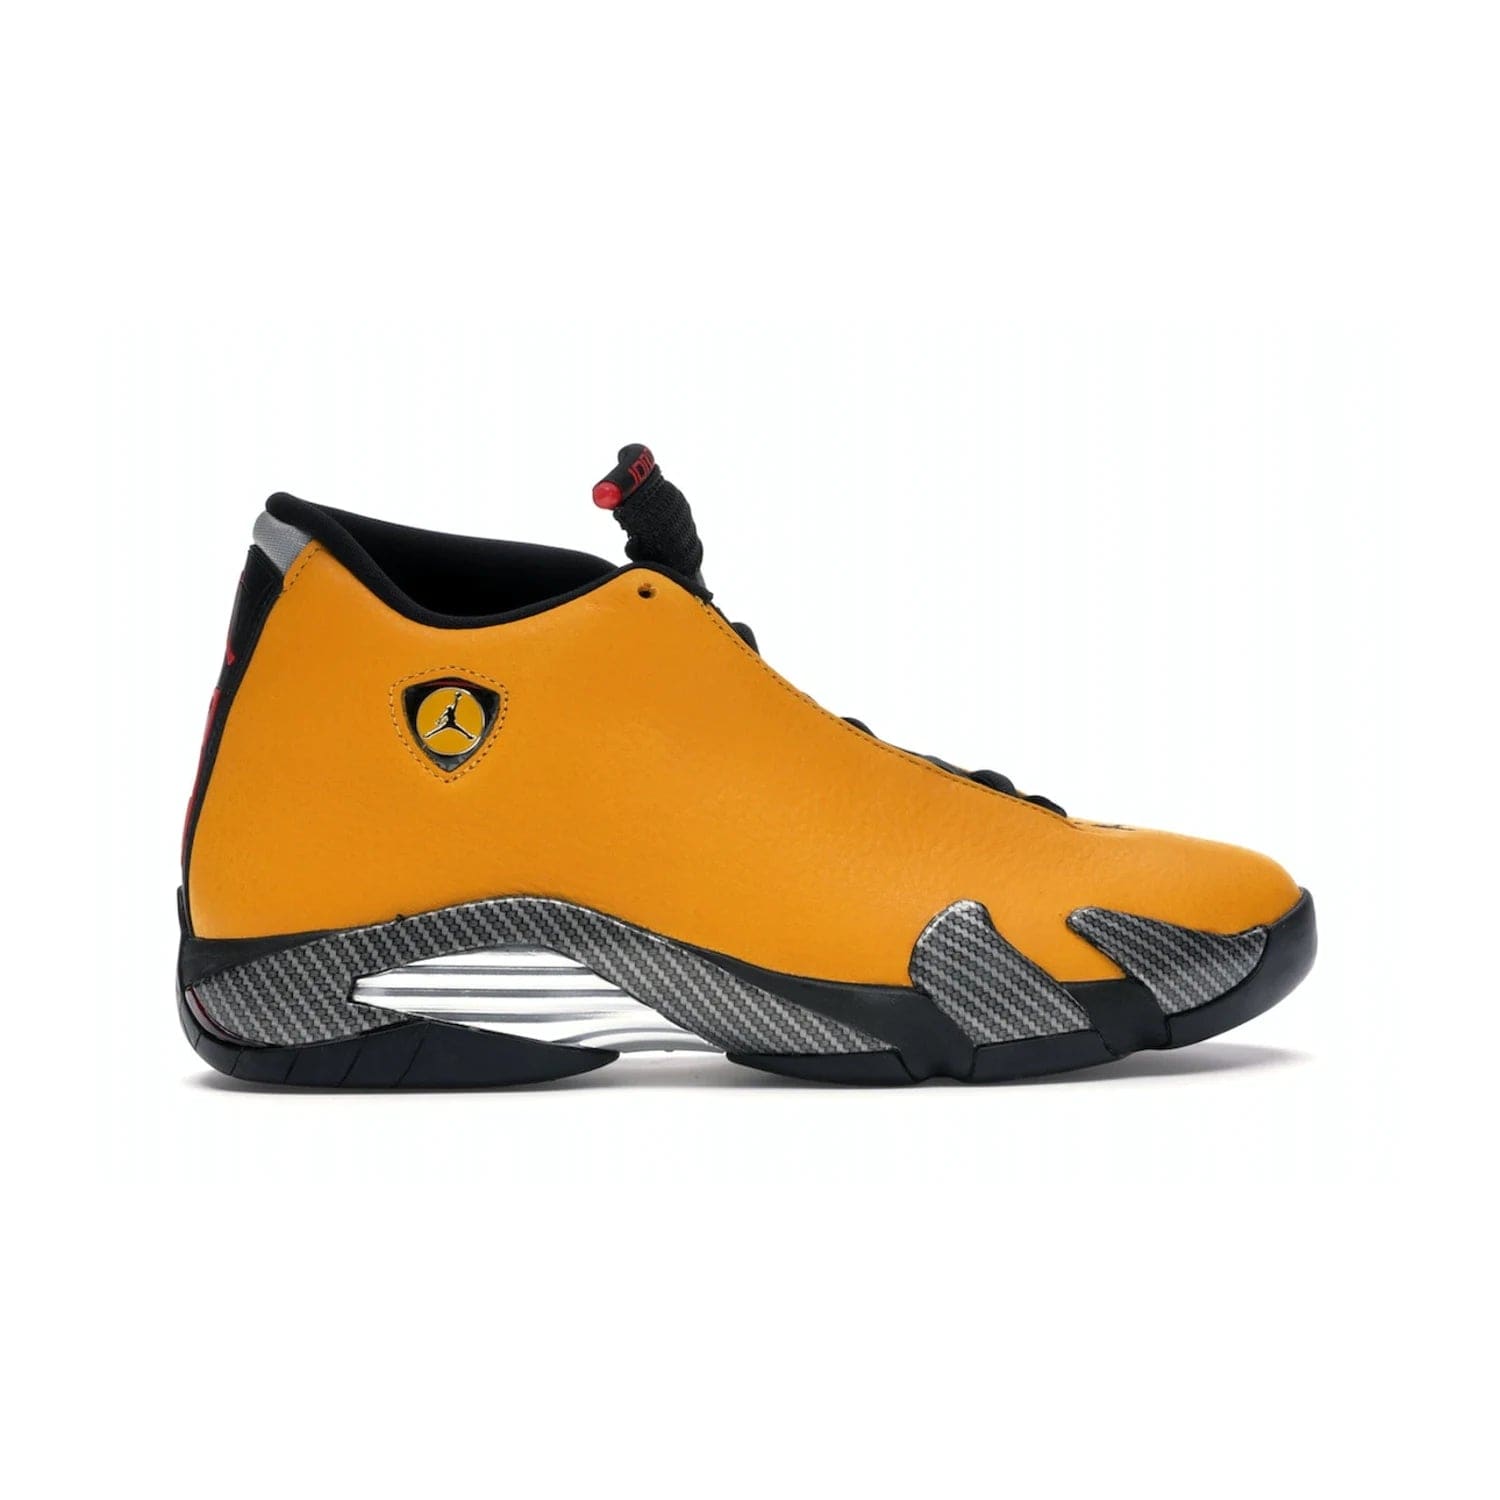 Jordan 14 Retro University Gold - Image 36 - Only at www.BallersClubKickz.com - Air Jordan 14 Retro University Gold: High-quality leather sneaker with Jumpman, tongue & heel logos. Zoom Air units & herringbone traction for superior comfort. University Gold outsole for stylish streetwear.